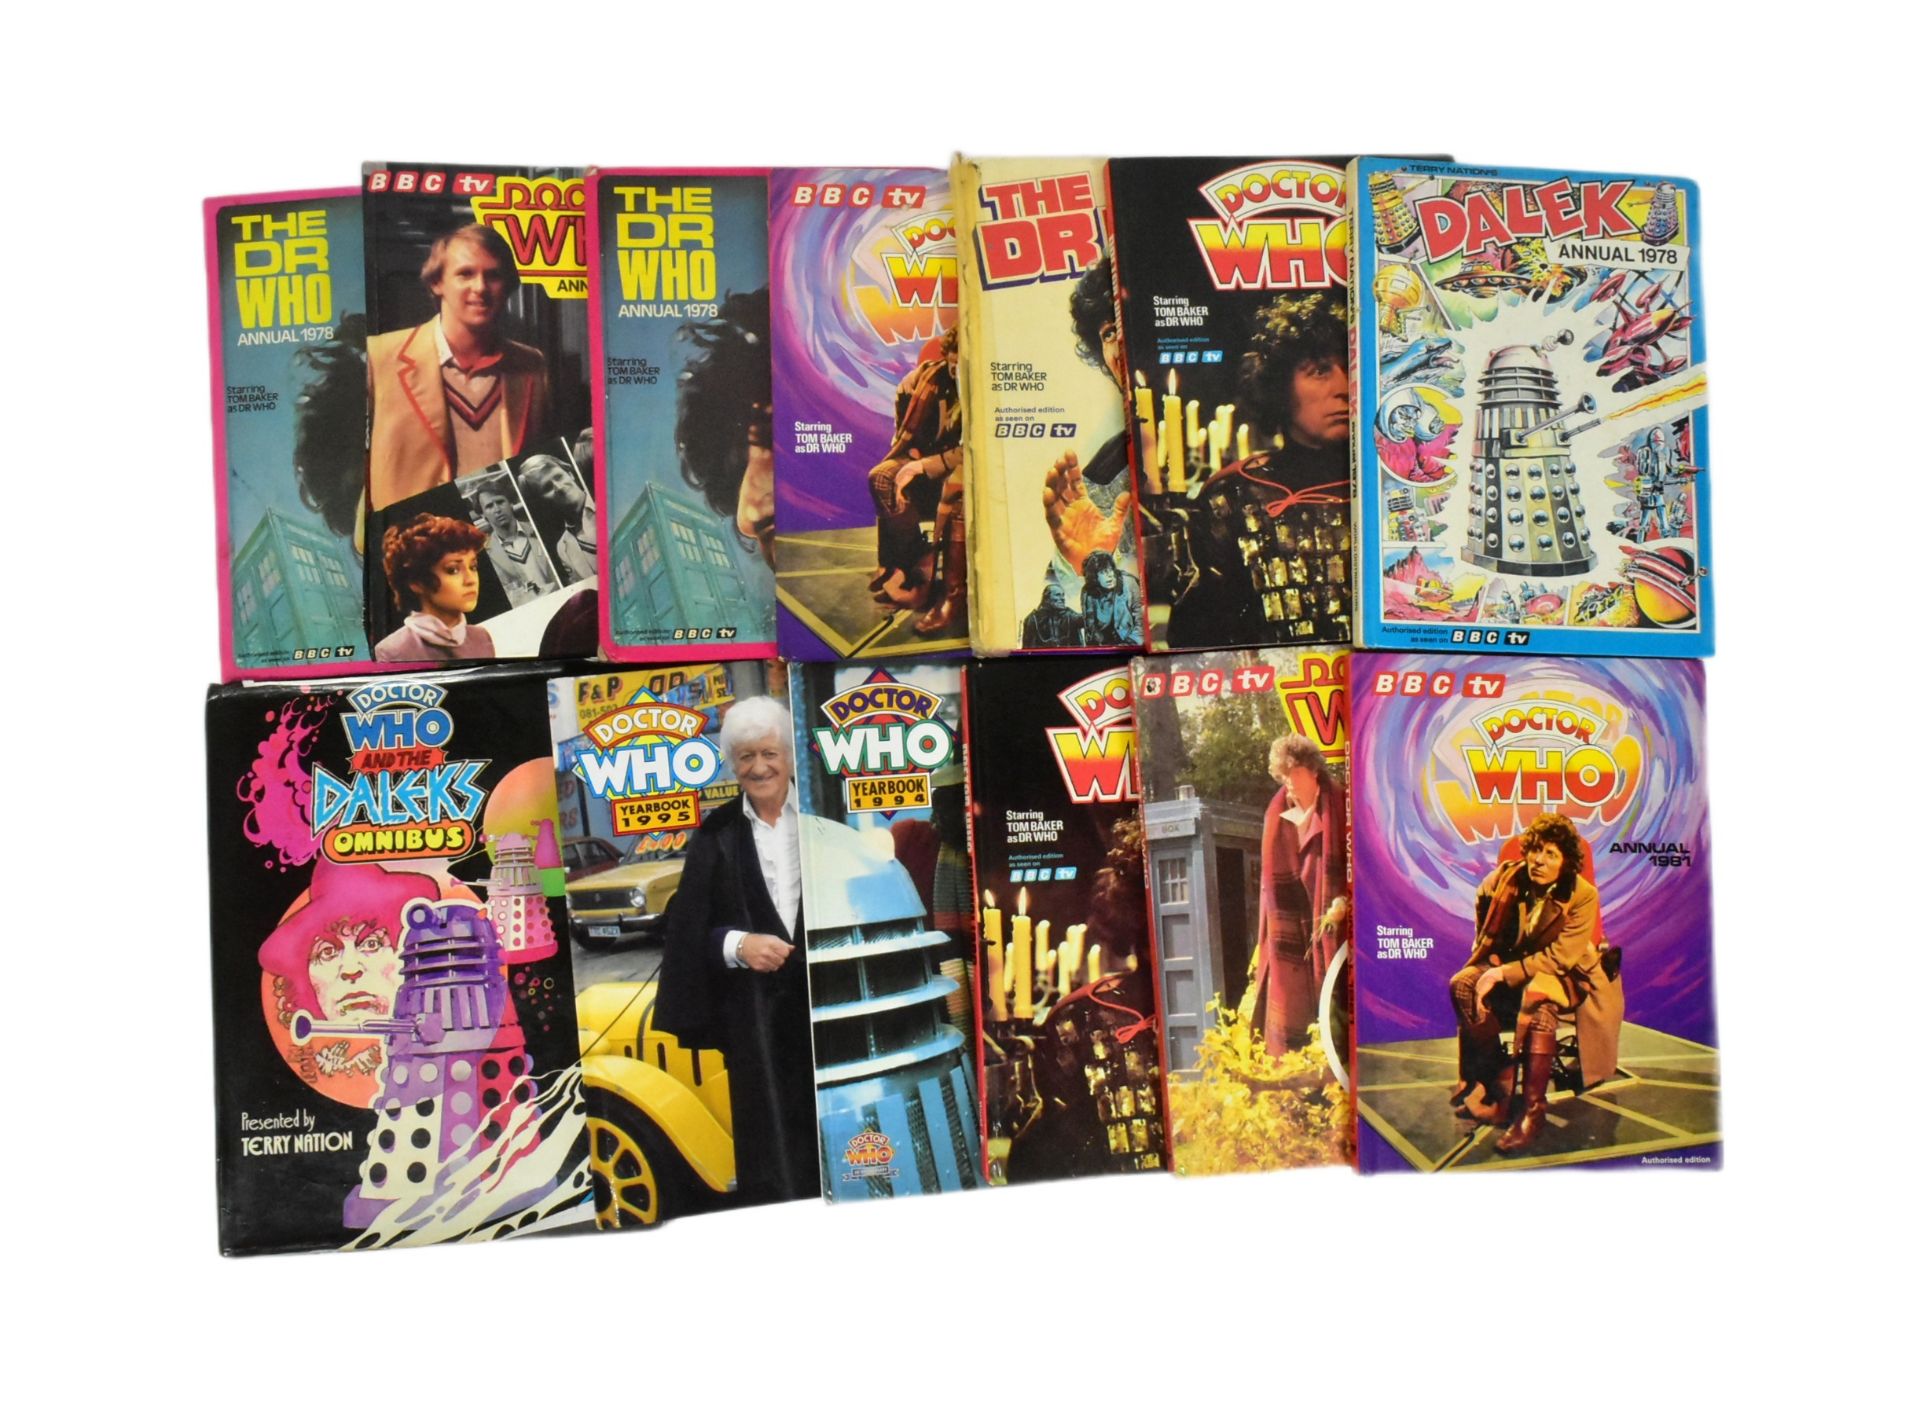 DOCTOR WHO - COLLECTION OF VINTAGE DR WHO ANNUALS